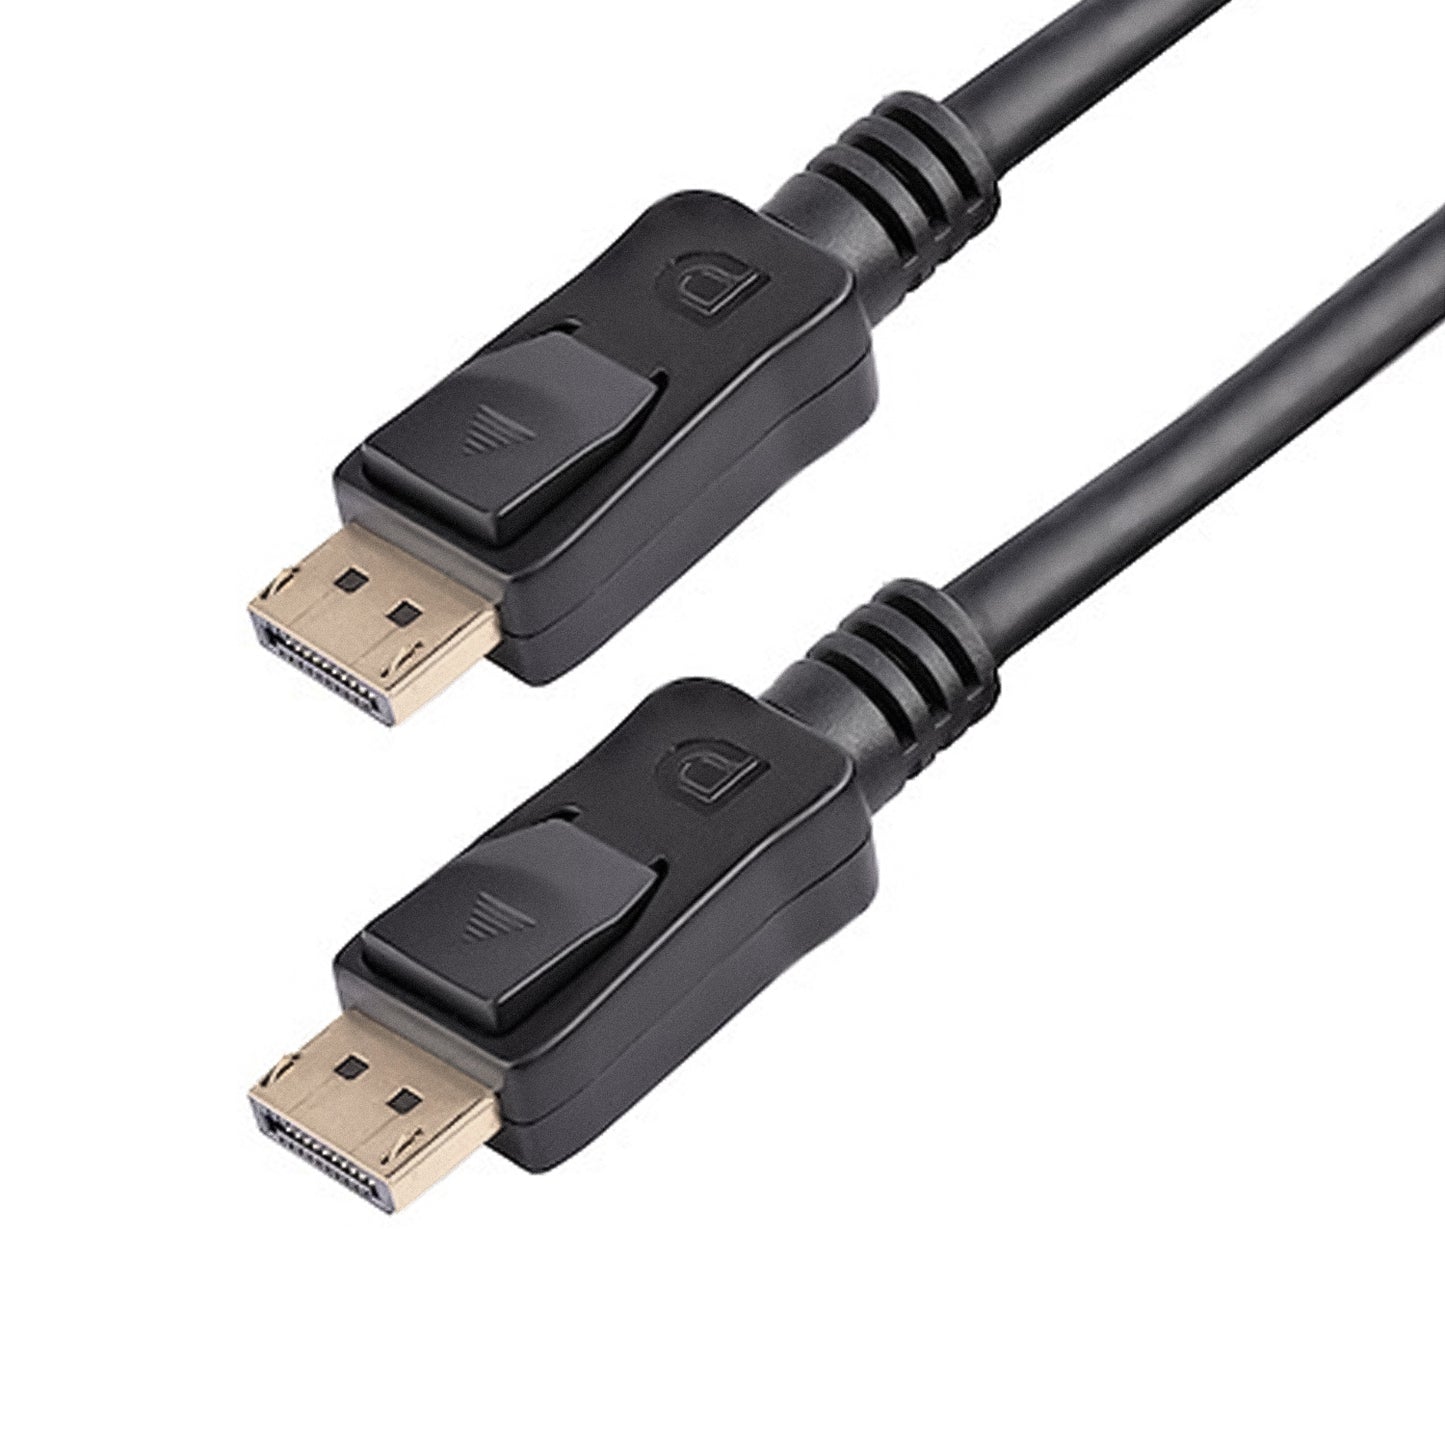 GBC 1.5 meter display port 1.2 cable, supports 4K at 60Hz, fast speed 21.6 Gbps, gold-plated connectors